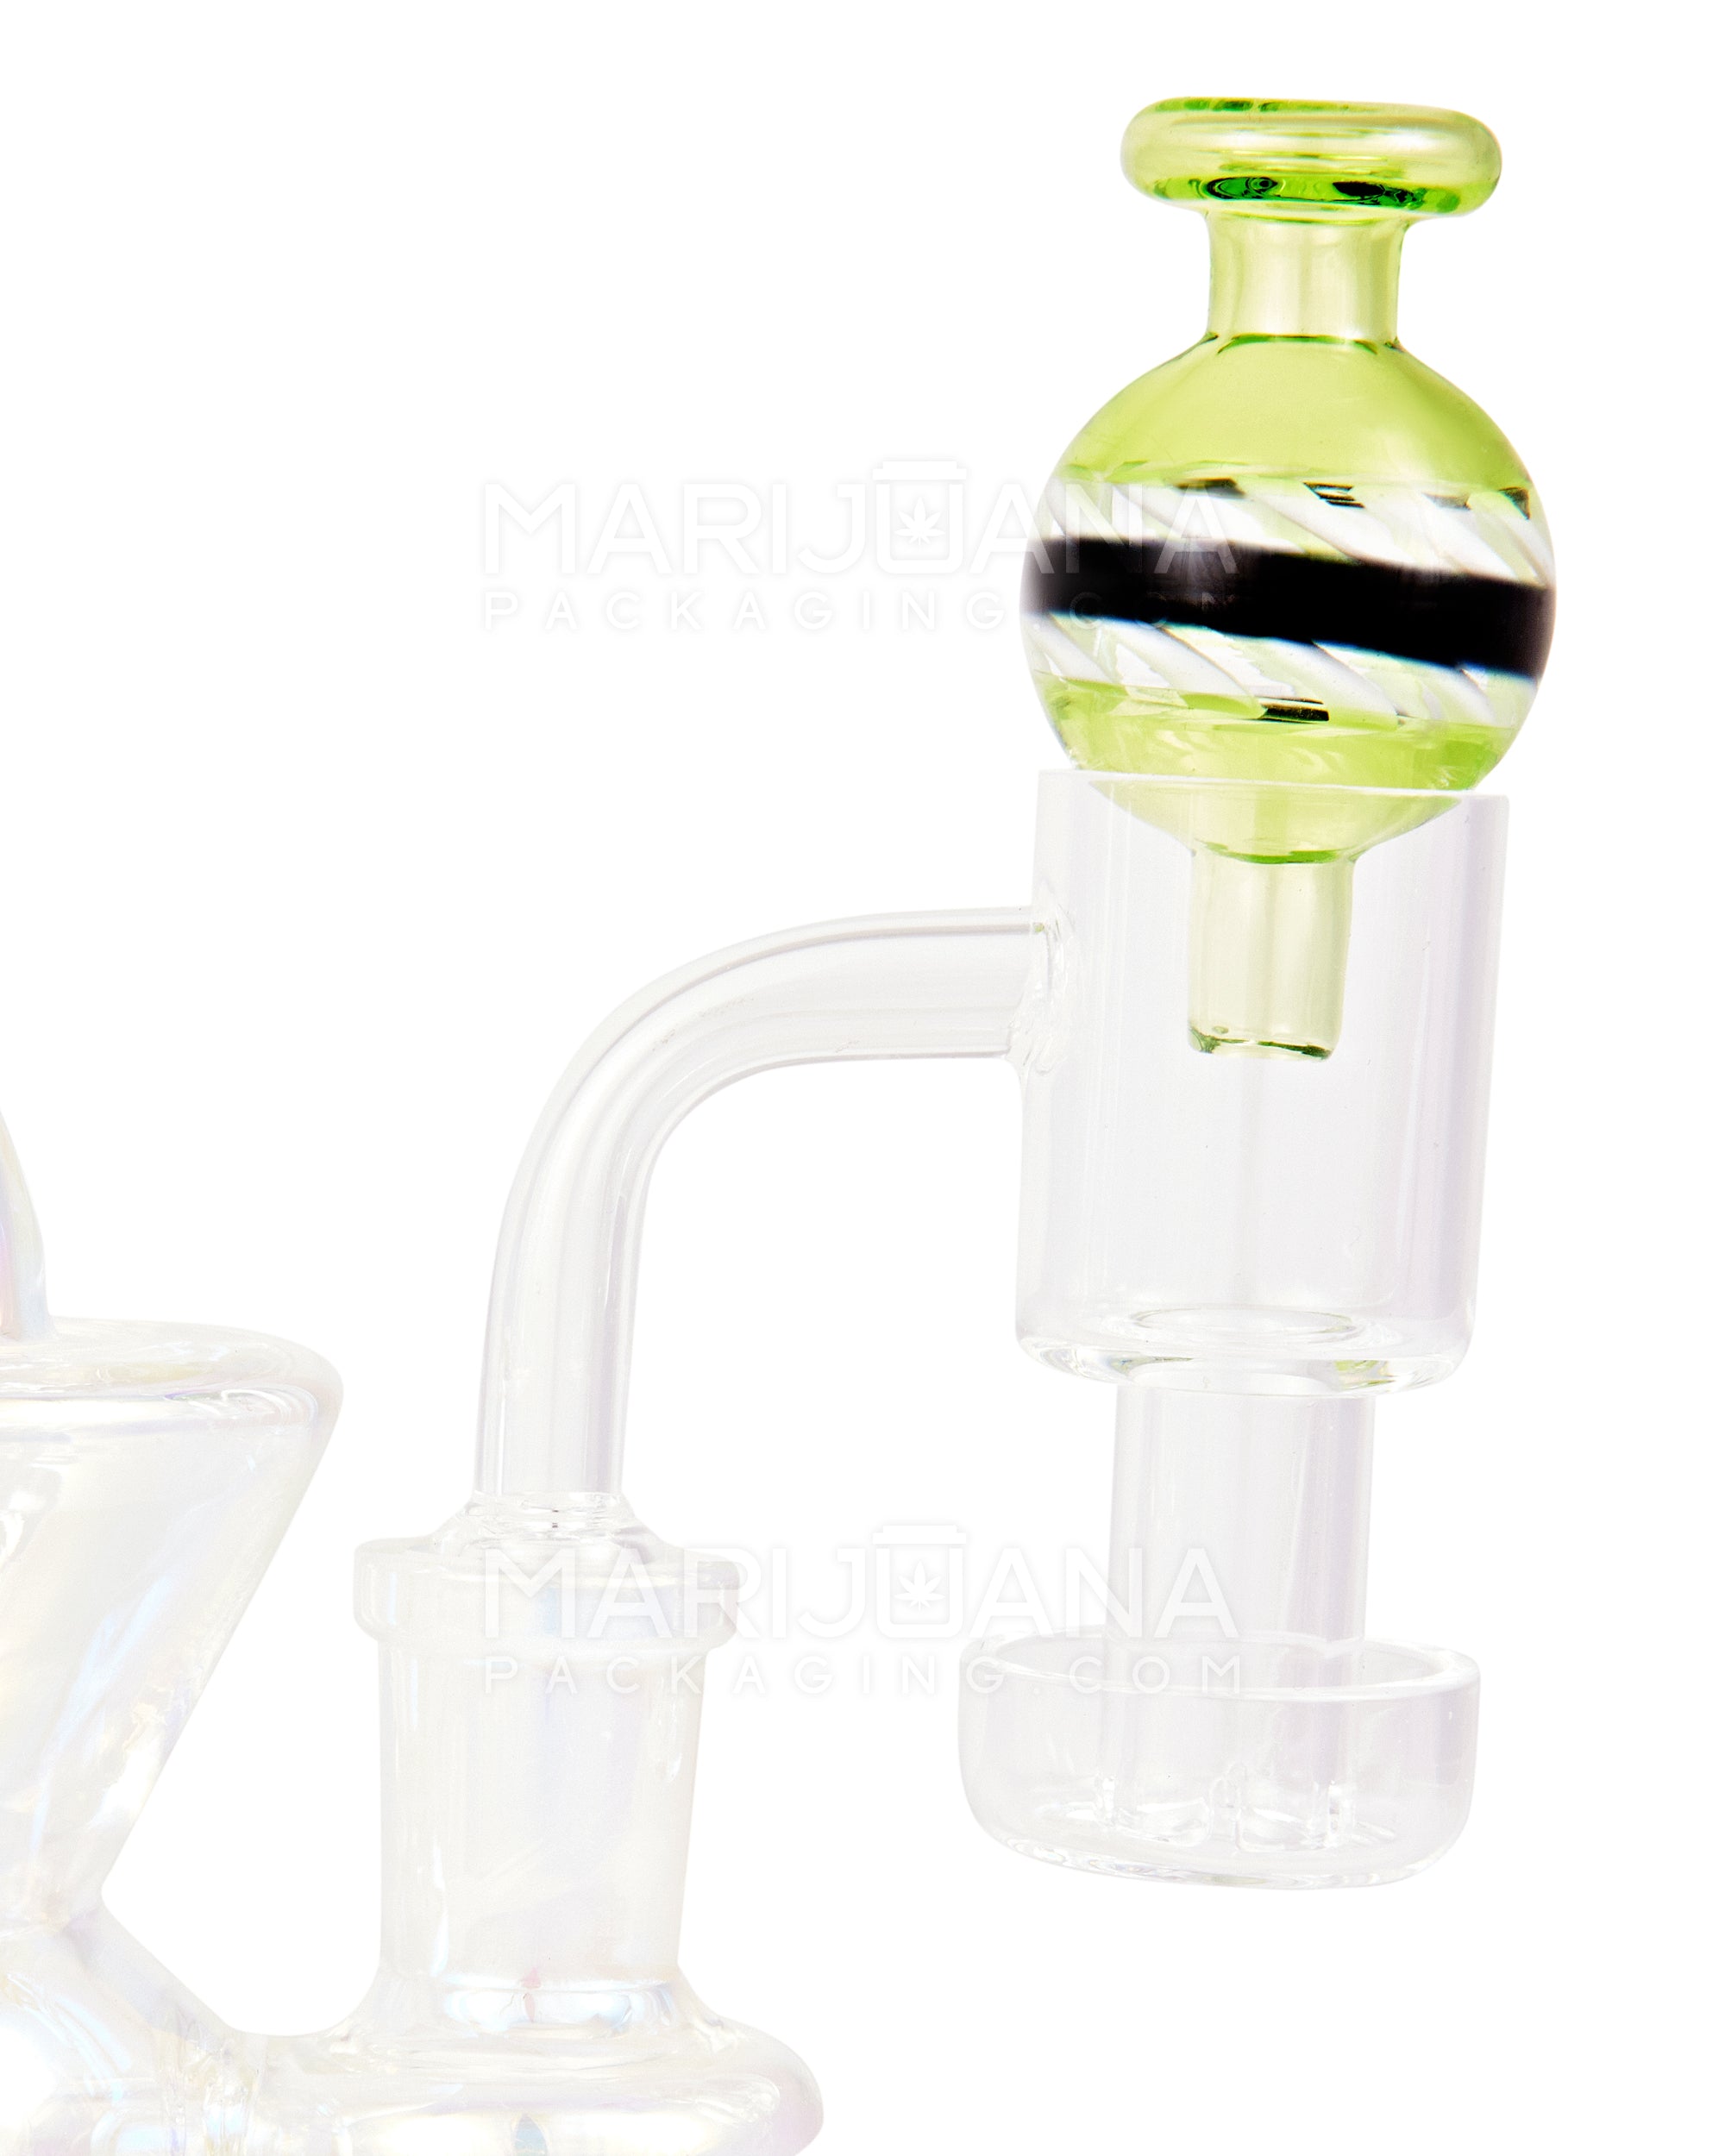 Striped & Swirl Bubble Carb Cap | 30mm - Glass - Assorted - 12